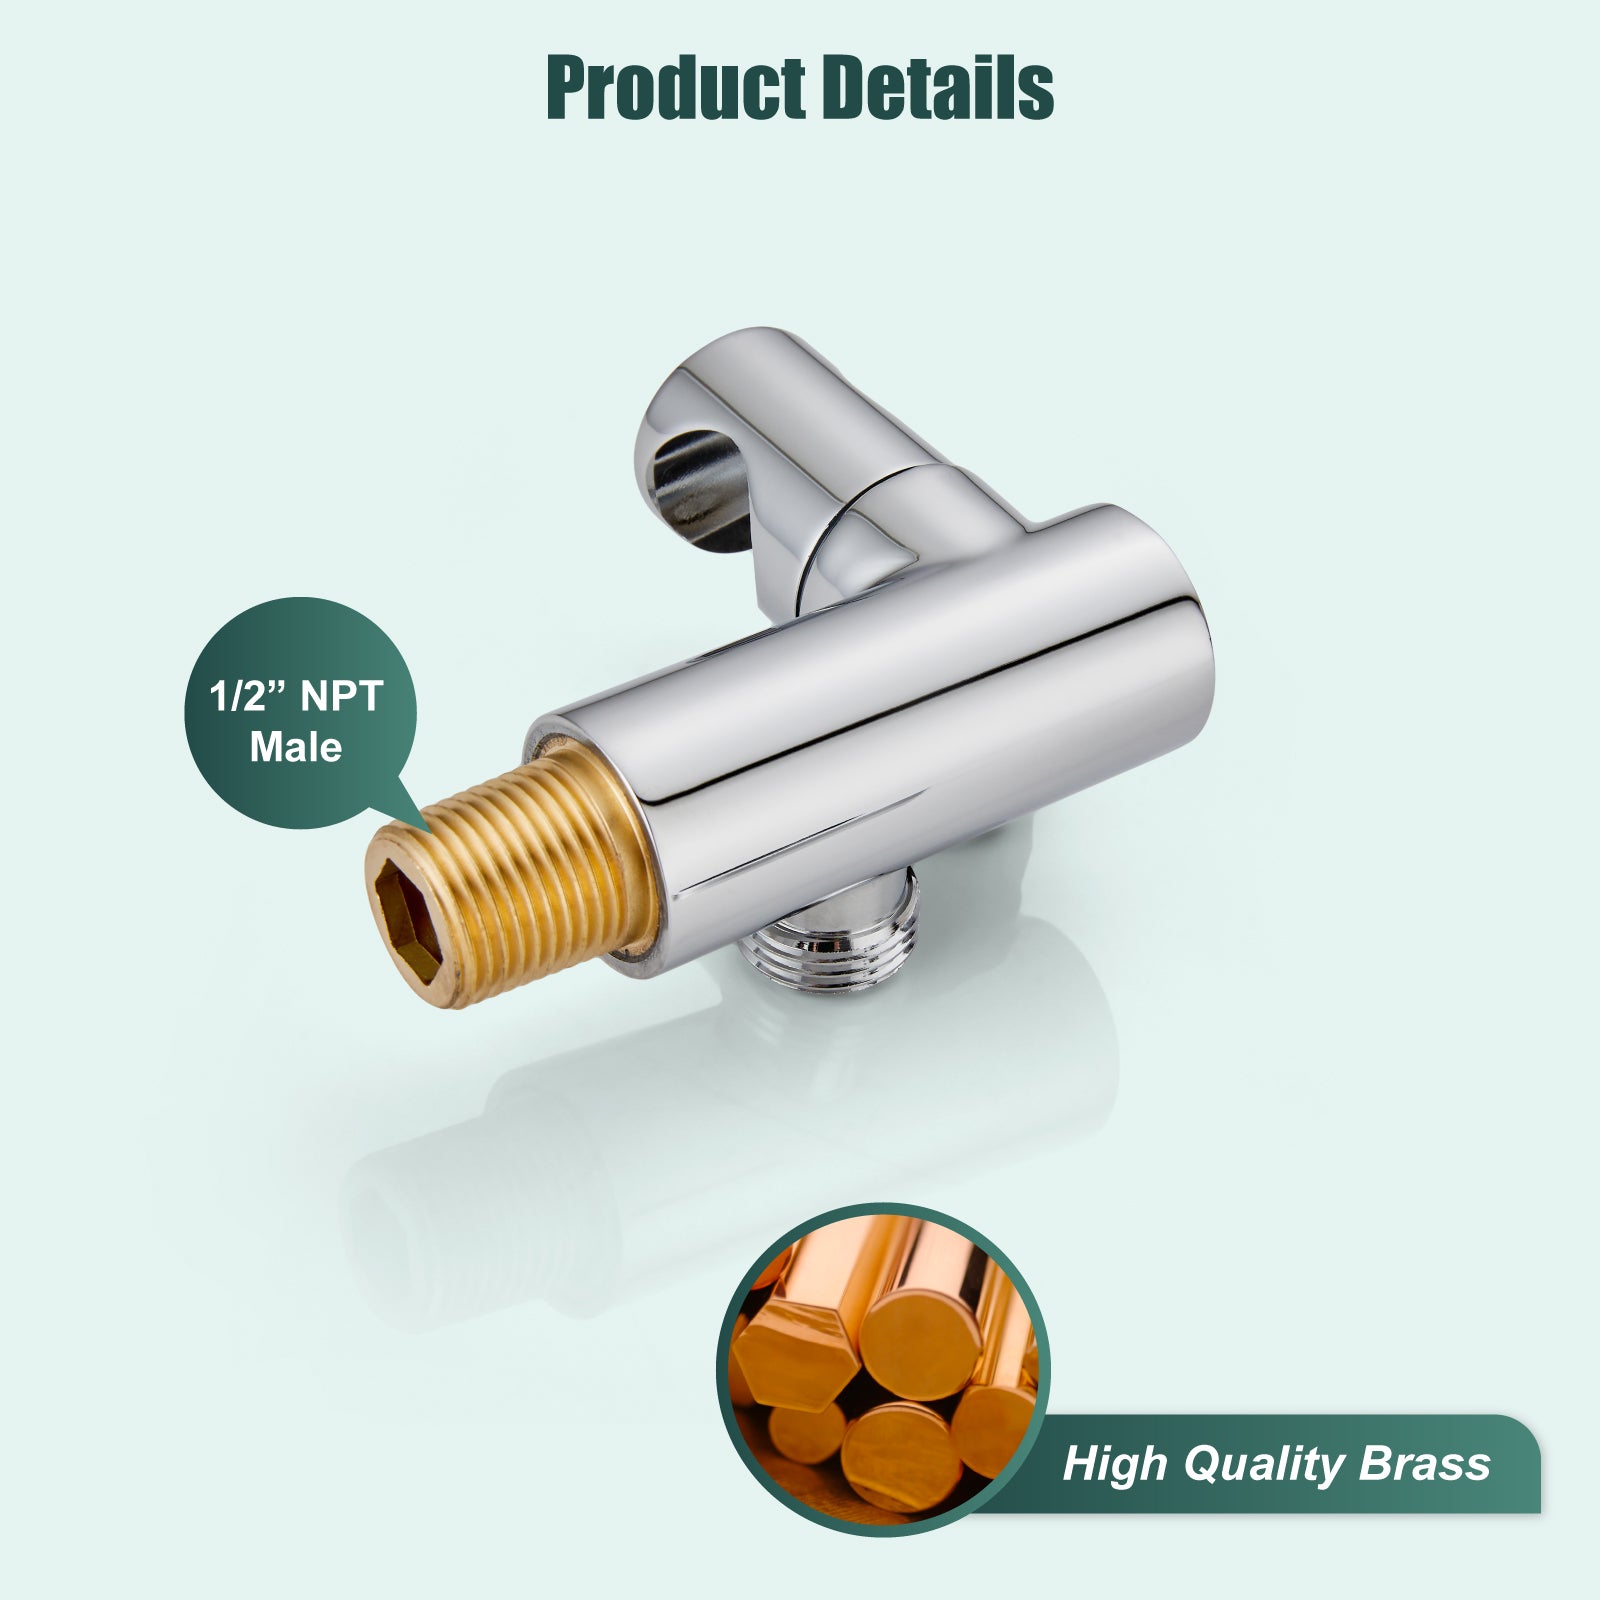 Shower Wand Holder with Round Cover Connecting Hose Shower Hand Bracket Wall Mount Shower Handheld Holder Heyalan Extension Arm Brass Contemporary Handheld Shower Holder